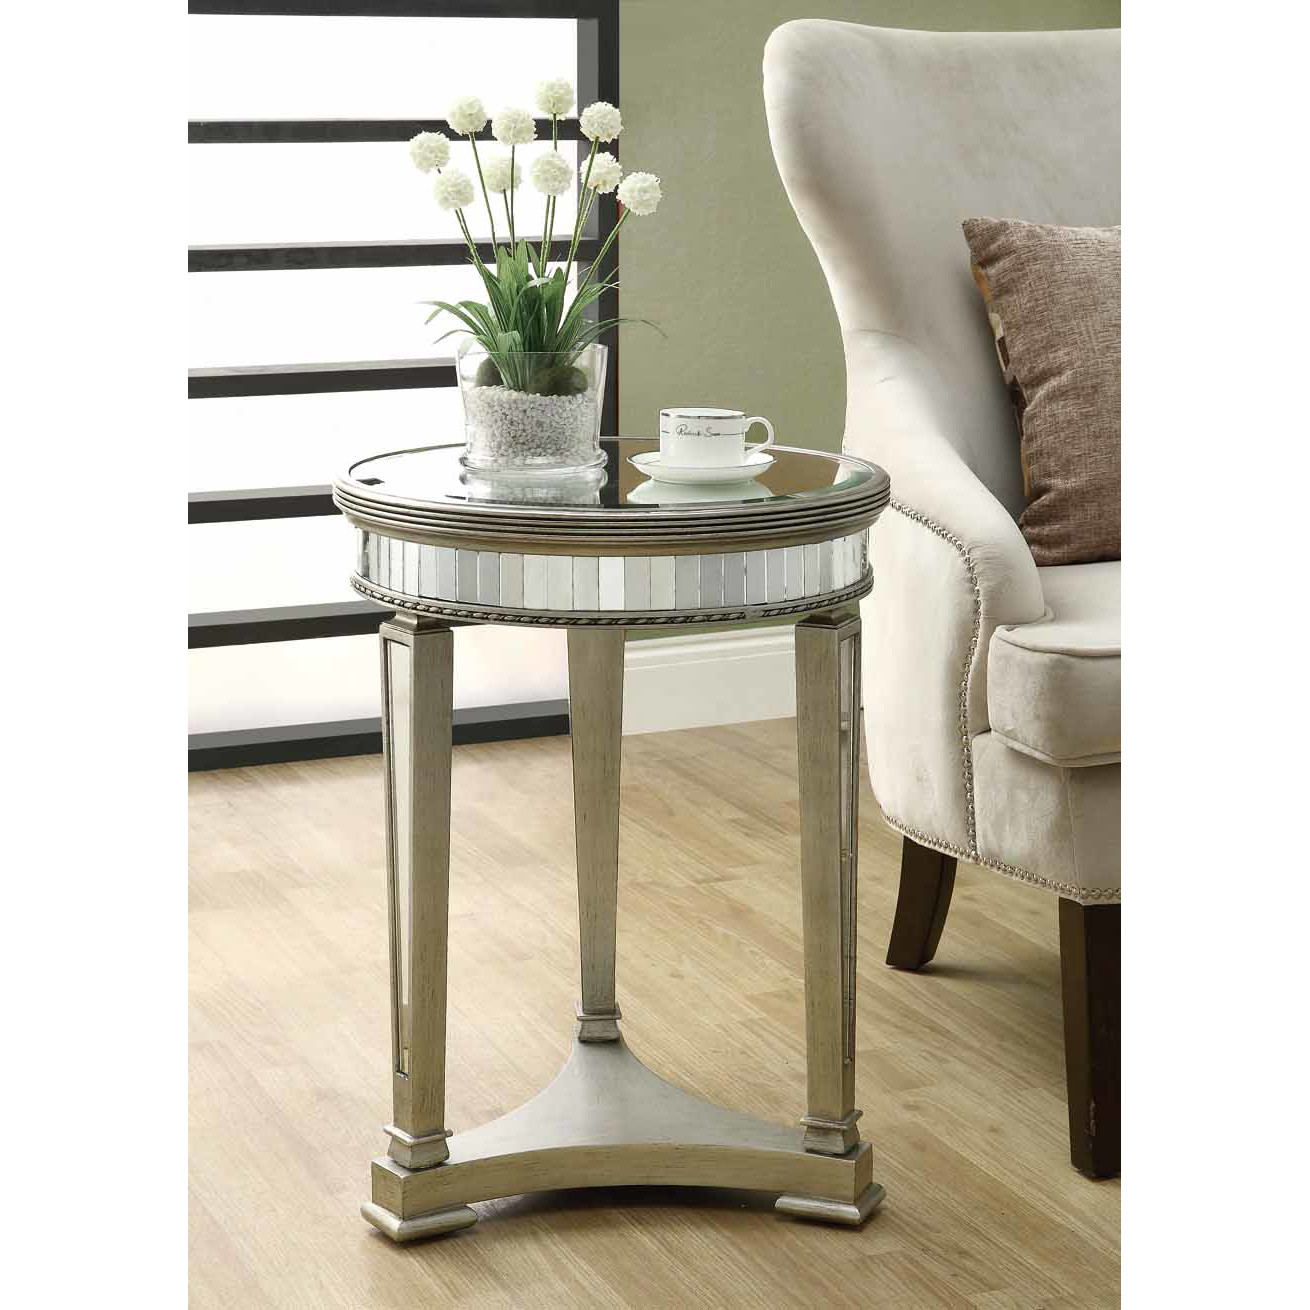 monarch specialties inc mirrored end table reviews wicker accent diamond asian inspired lamps home furniture design west elm coffee white ikea bedroom cupboards round dining and